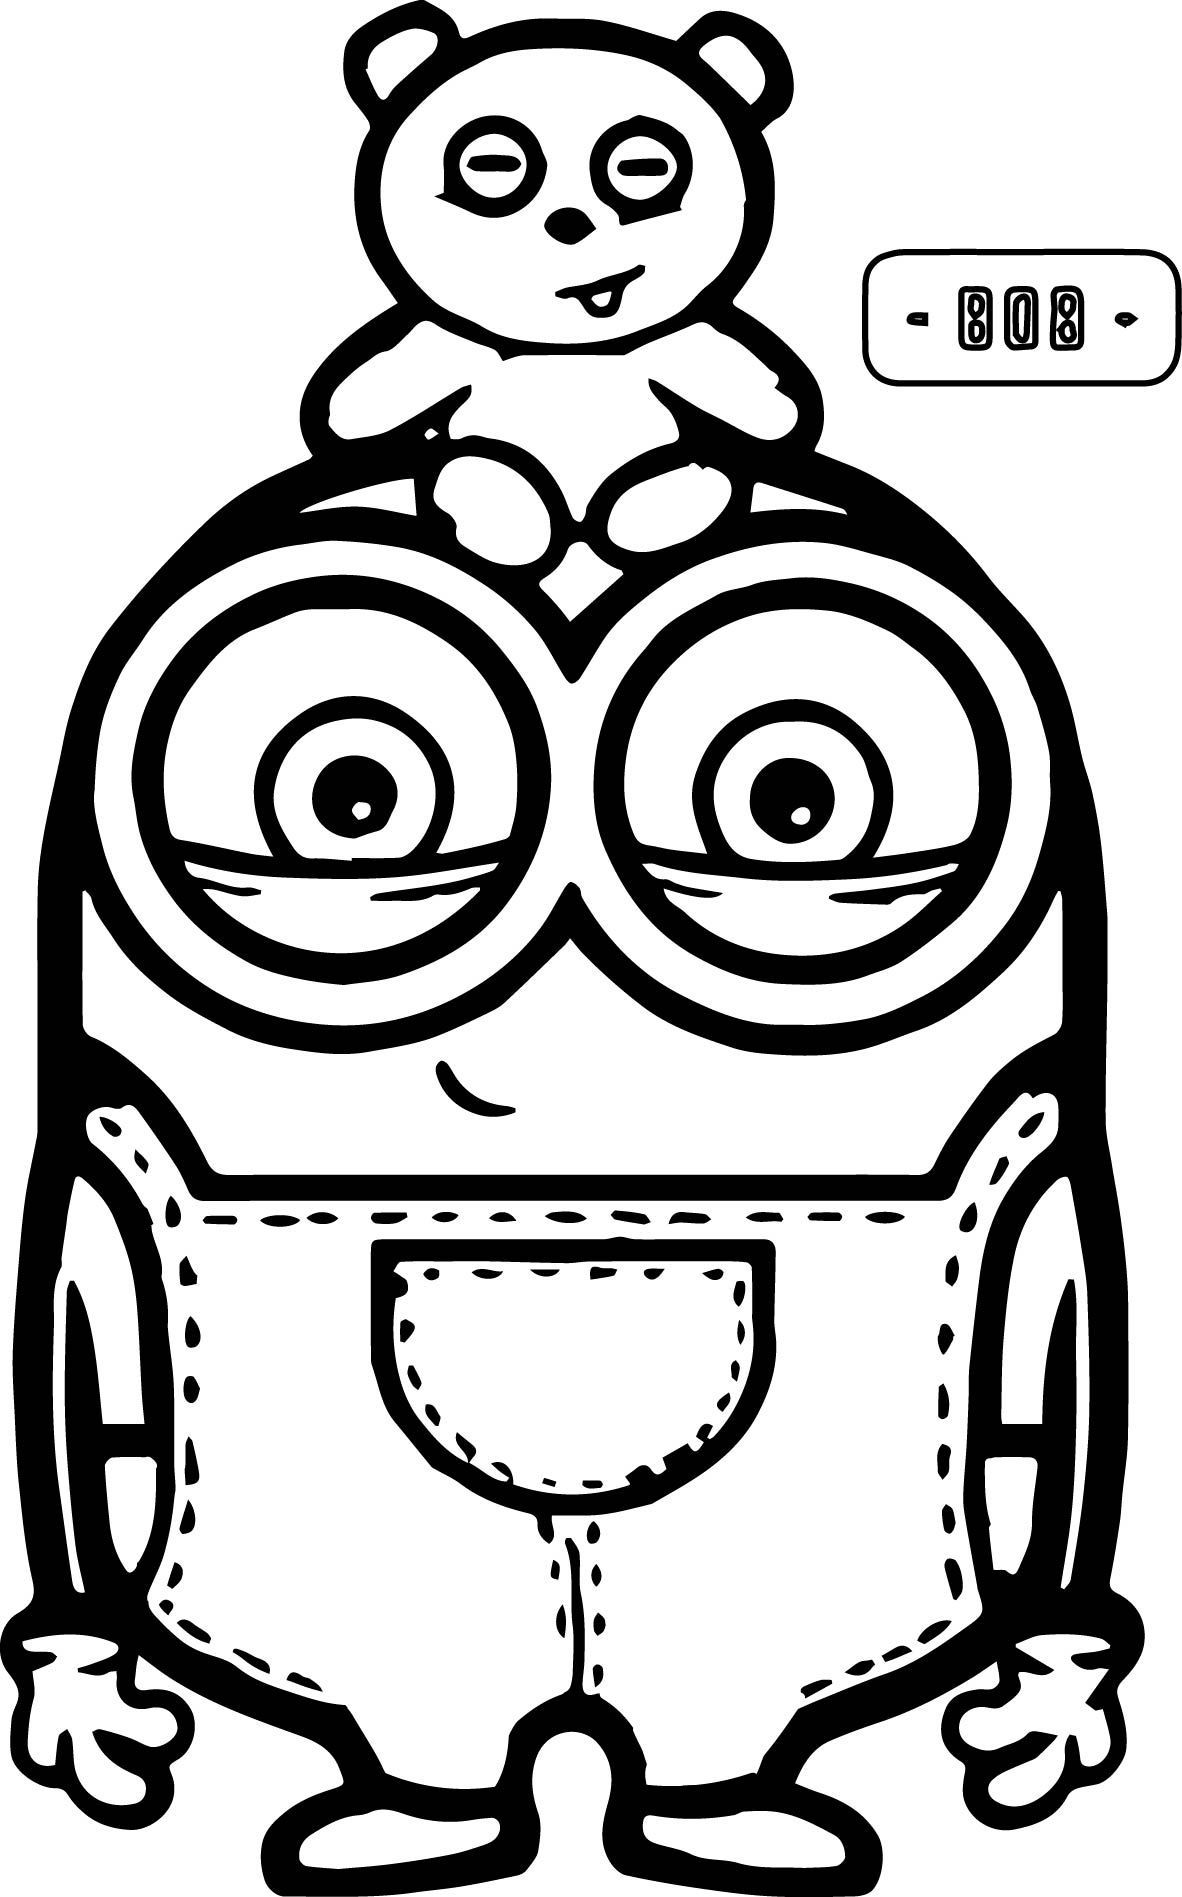 Image result for minion coloring pages minion coloring pages minions coloring pages cute coloring pages